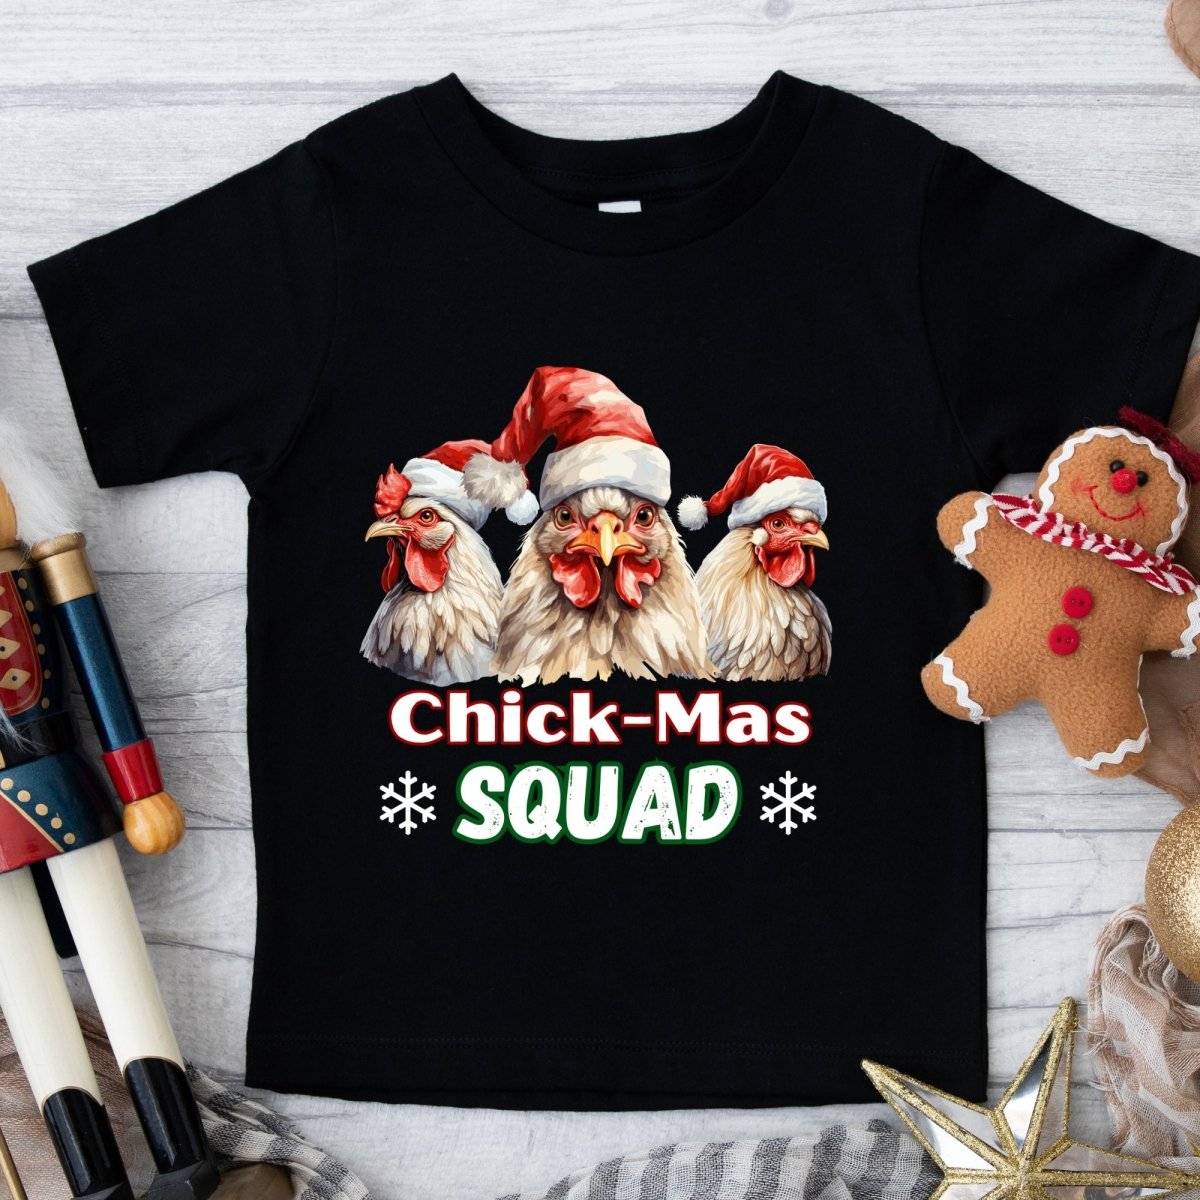 Christmas Chicken Squad T-Shirt - High Quality Festive Family Children T-Shirt, Gift for Chicken Lovers, Matching Holiday Tees, Toddler Shirt - Everything Pixel